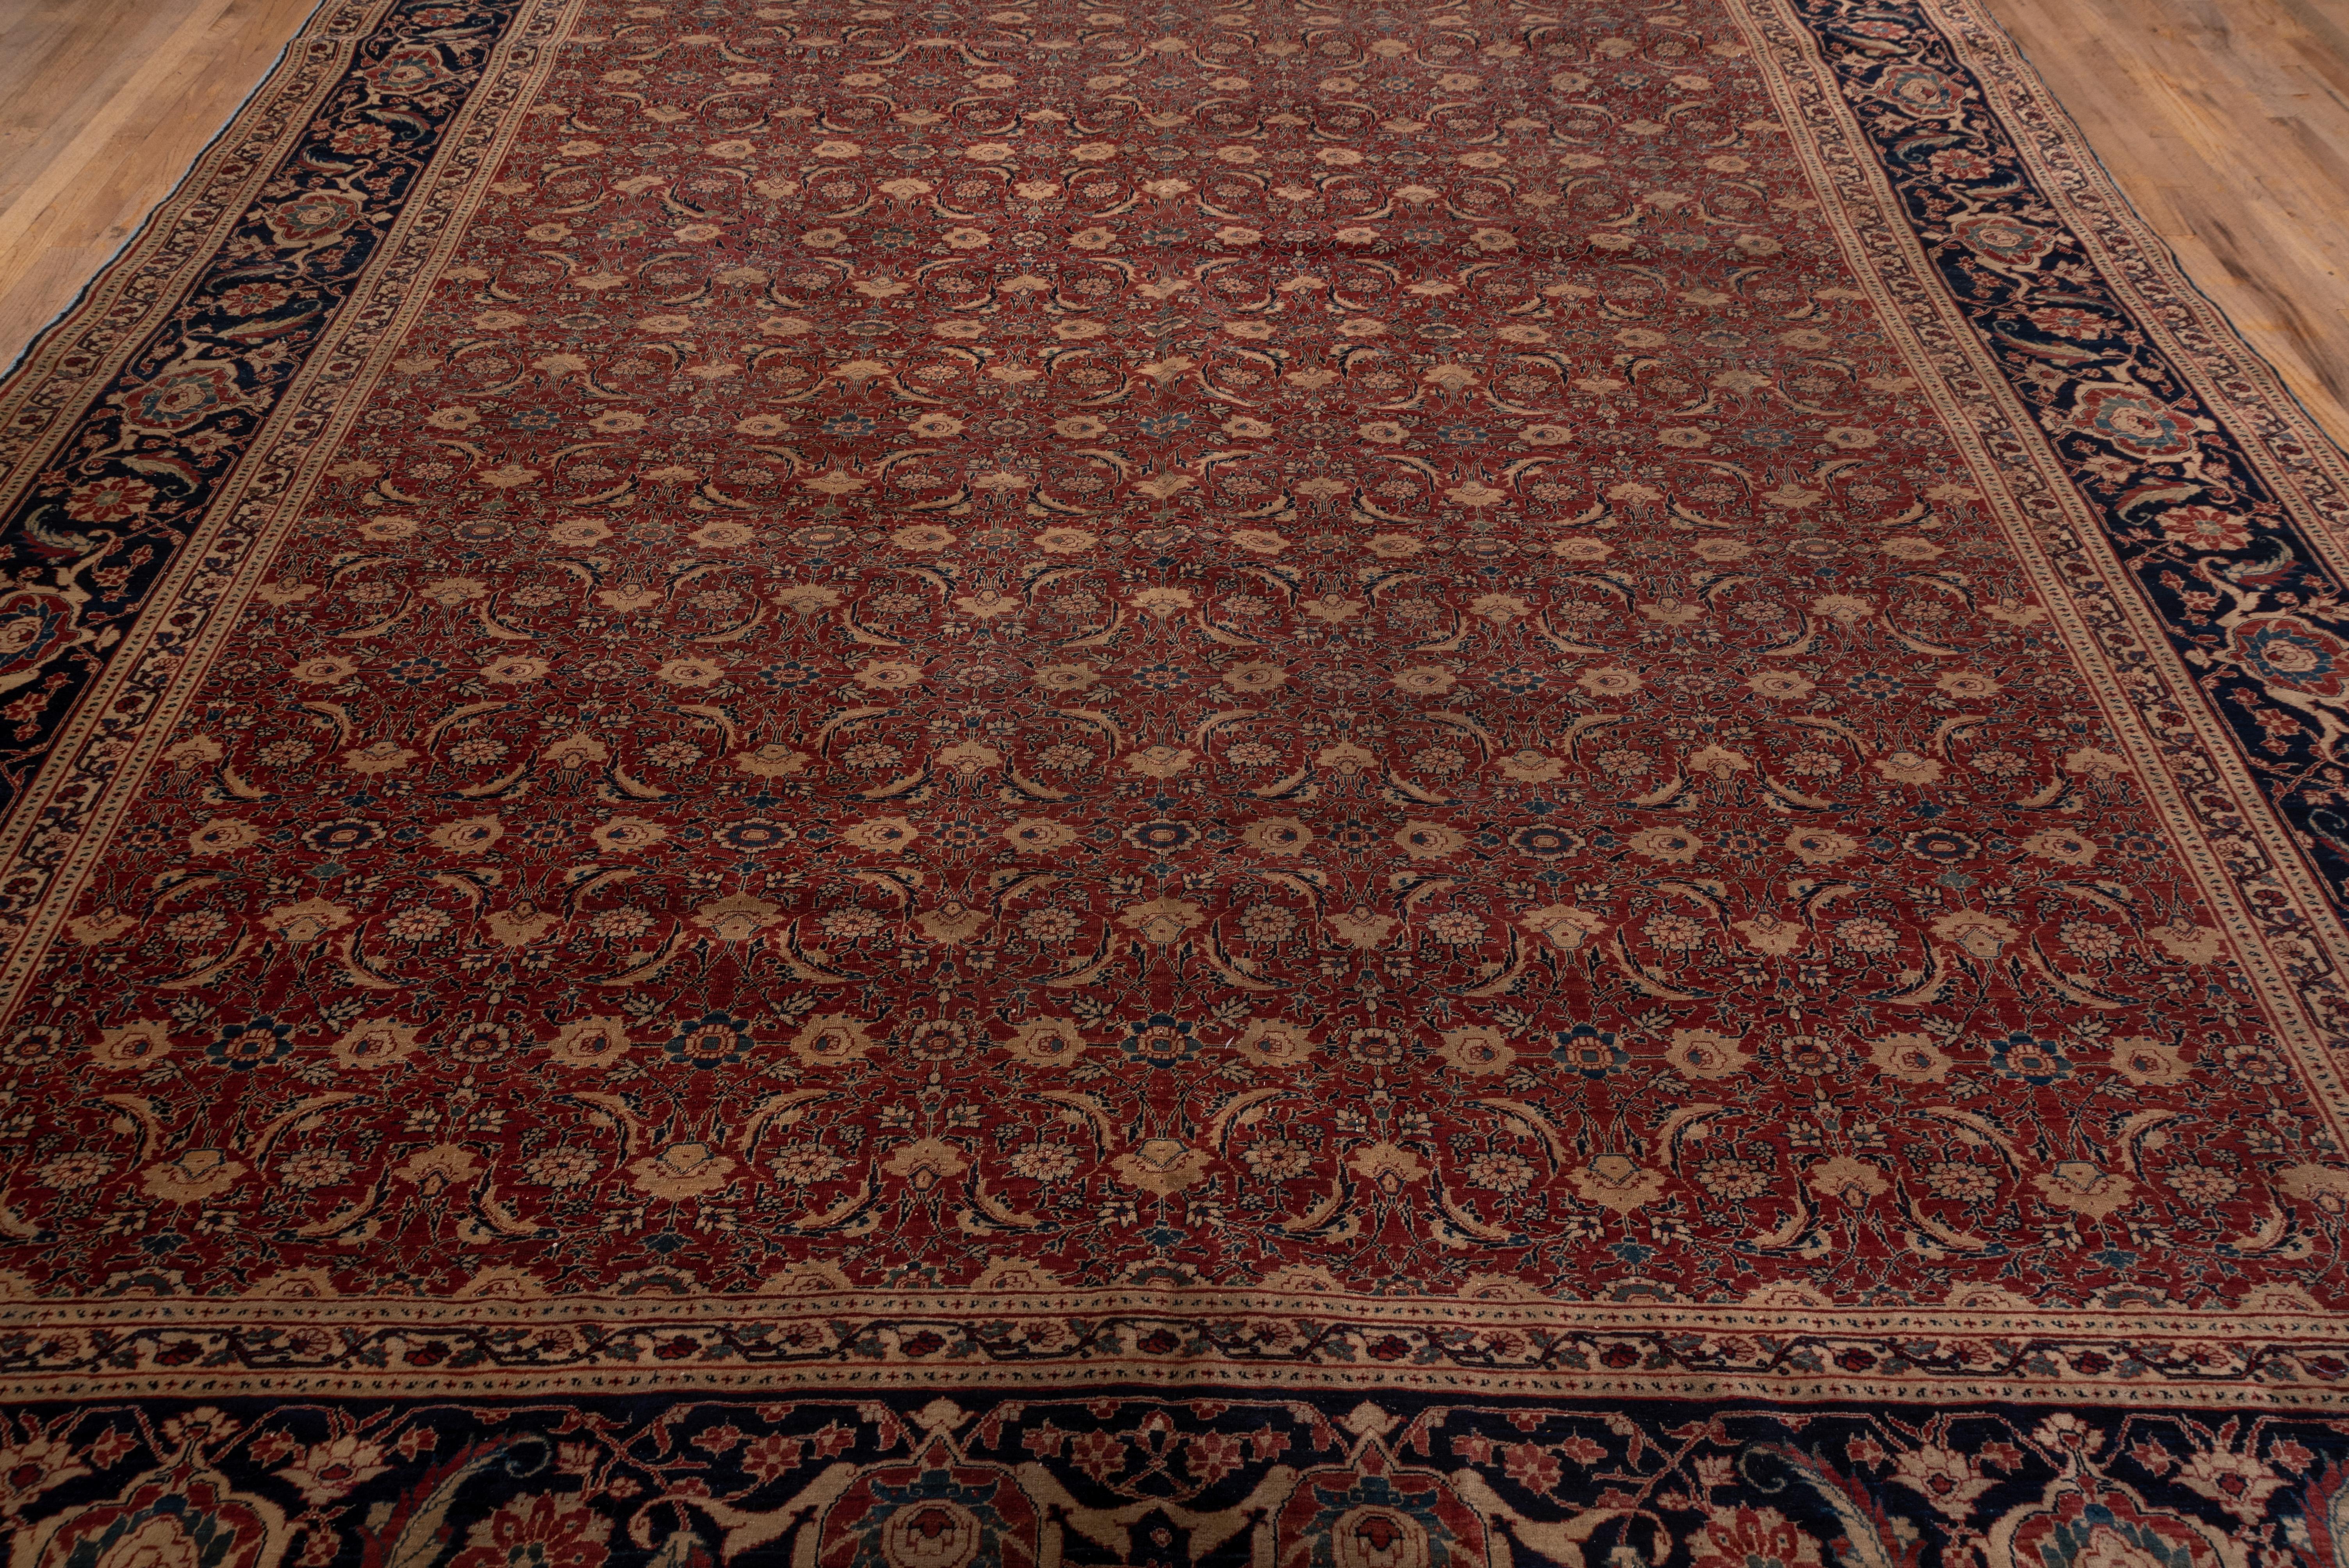 The red field is densely patterned by the Tabriz Herati design, while the equally iconic reversing turtle palmette, lancet leaf and rosette border makes the proper frame for this good condition NW Persian urban carpet.